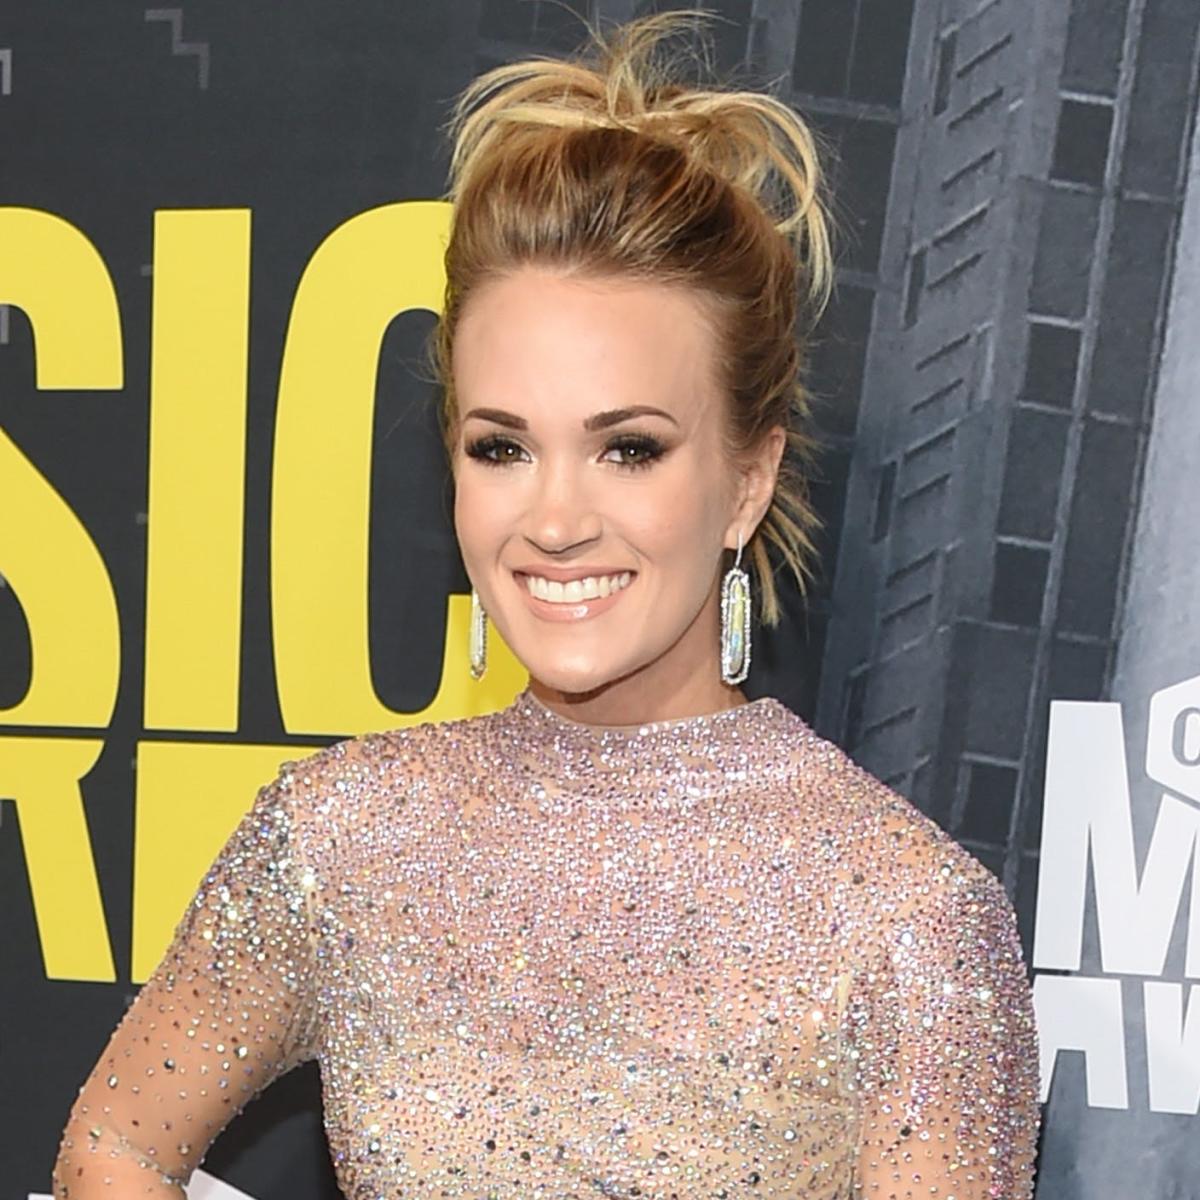 Carrie Underwood shares first full photo of her face since accident that  required 40 stitches